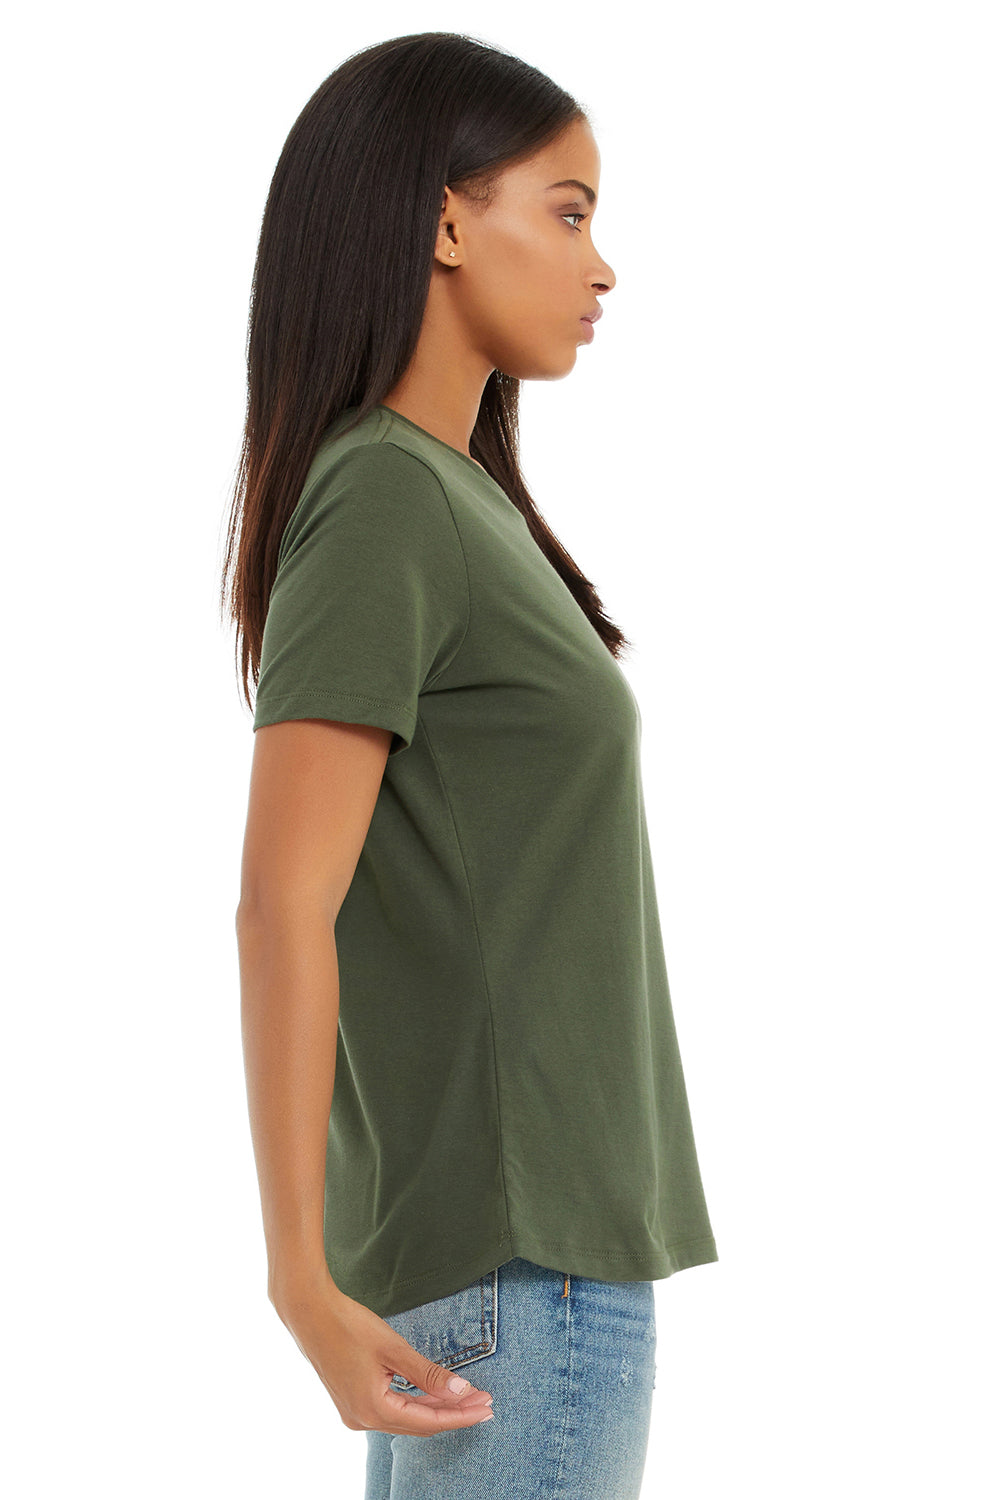 Bella + Canvas BC6400/B6400/6400 Womens Relaxed Jersey Short Sleeve Crewneck T-Shirt Military Green Model Side